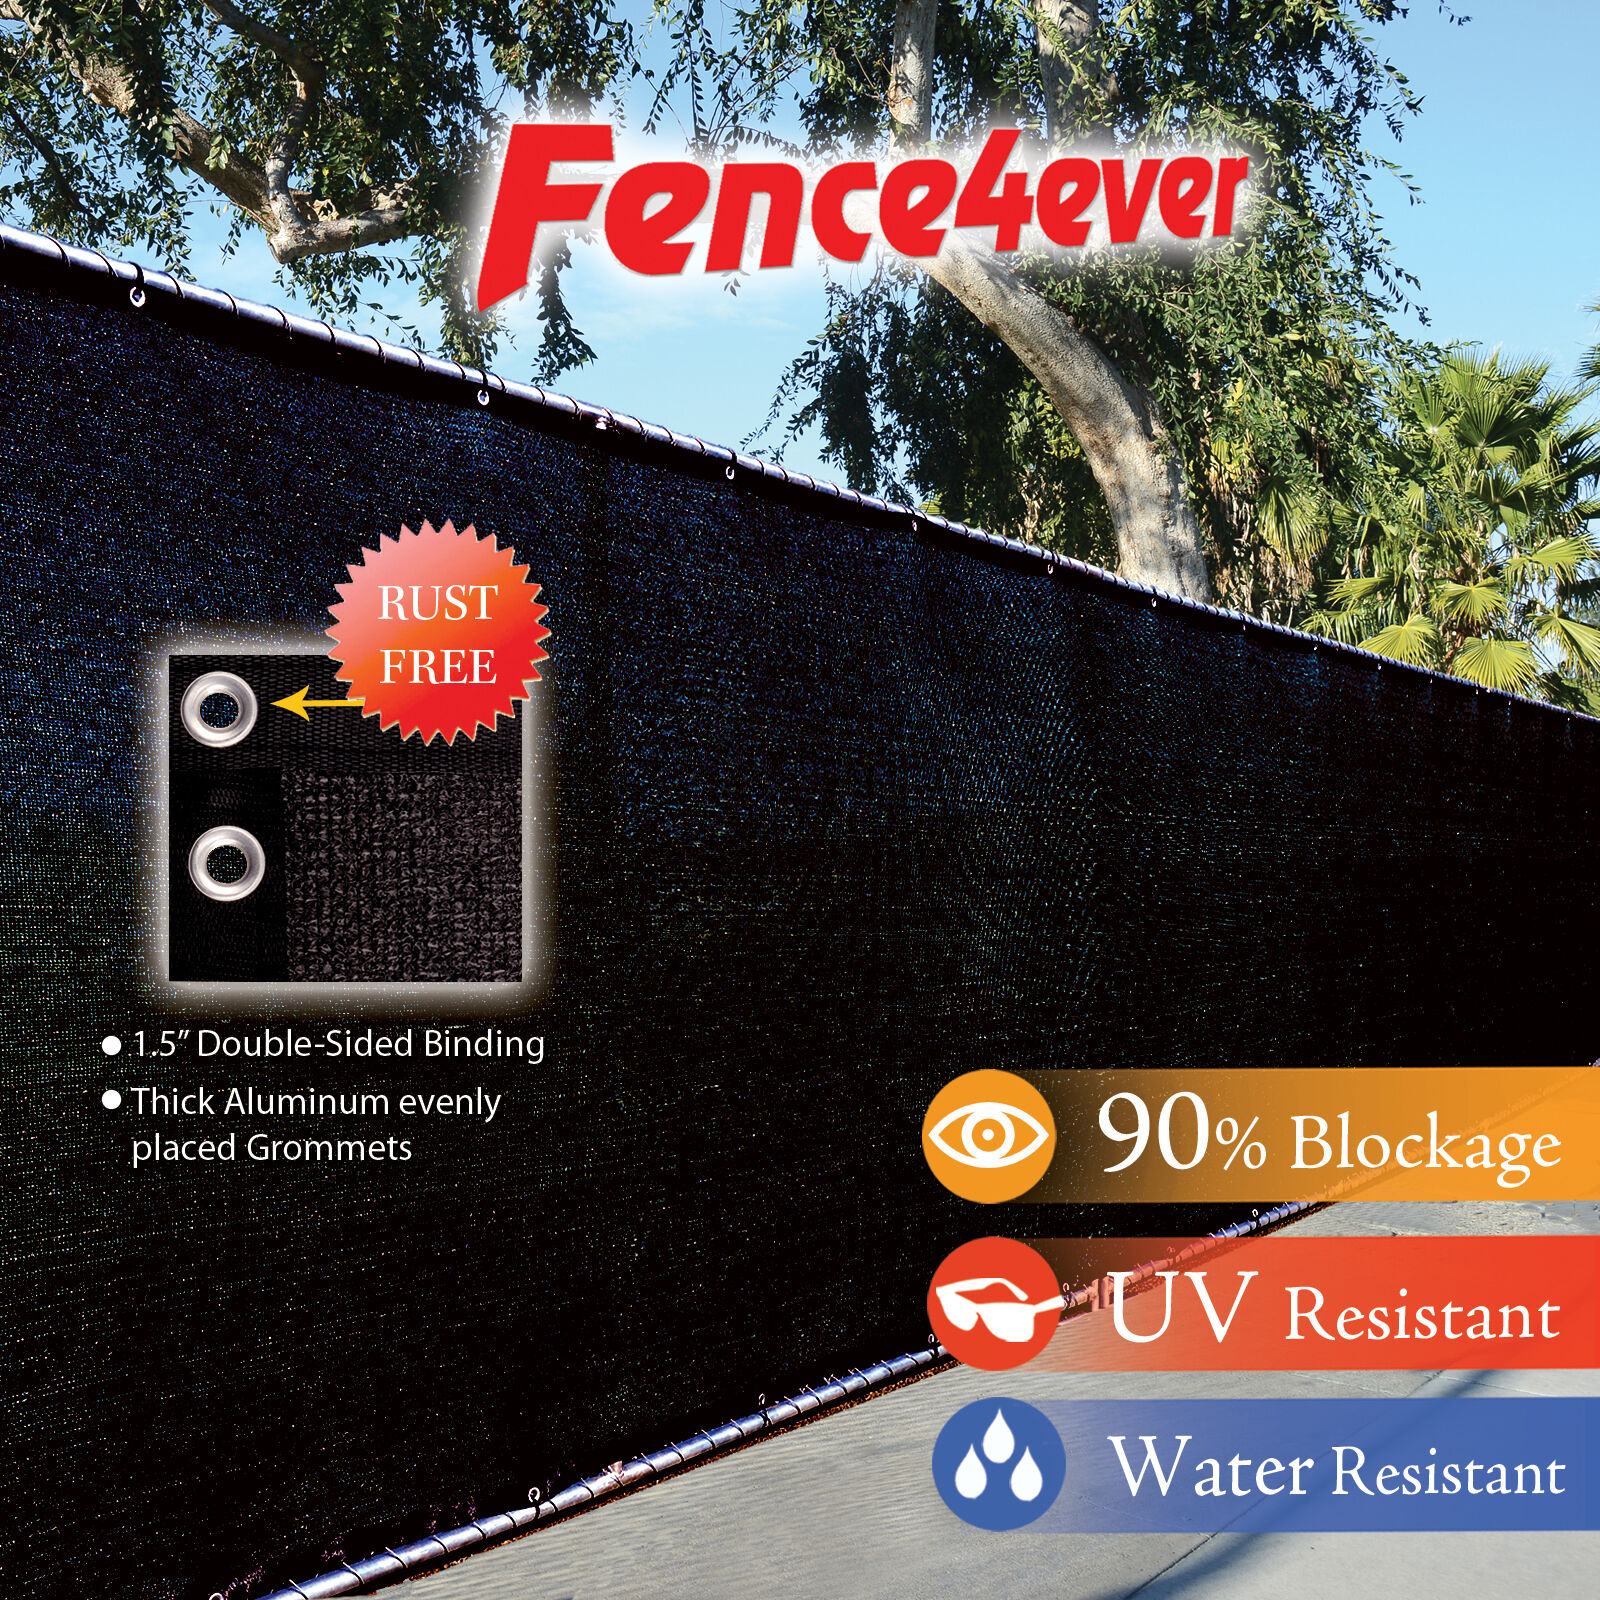 Black 4' 5' 6' 8' Tall Fence Windscreen Privacy Screen Shade Cover Mesh Garden